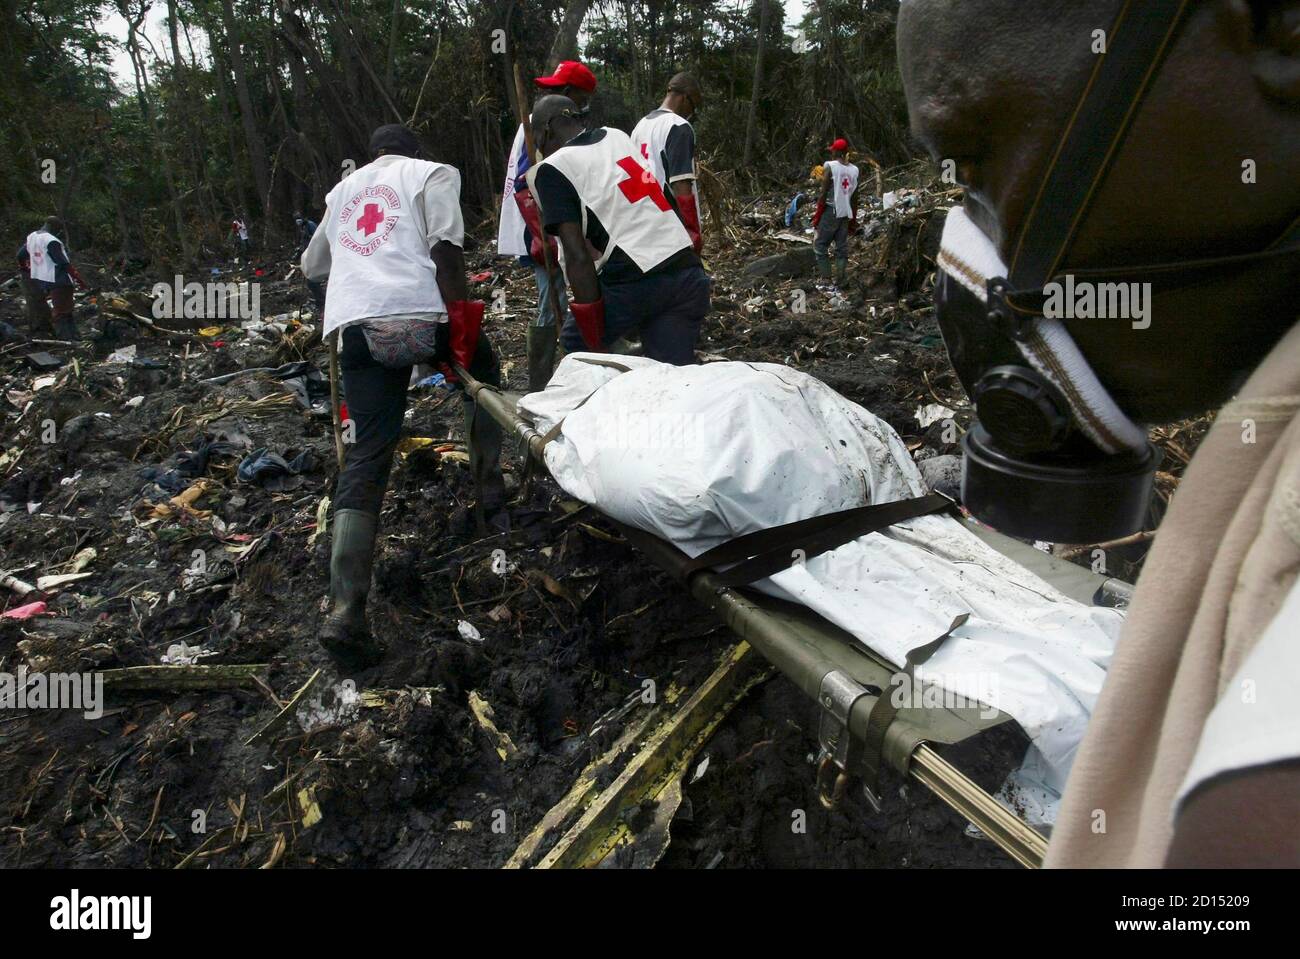 Cameroonian Red Cross workers remove human remains from the scene of a Kenya Airways plane crash in a swampy area close to the village of Mbanga Pongo, near the city of Douala, May 8, 2007. REUTERS/Emmanuel Braun (CAMEROON) Stock Photo